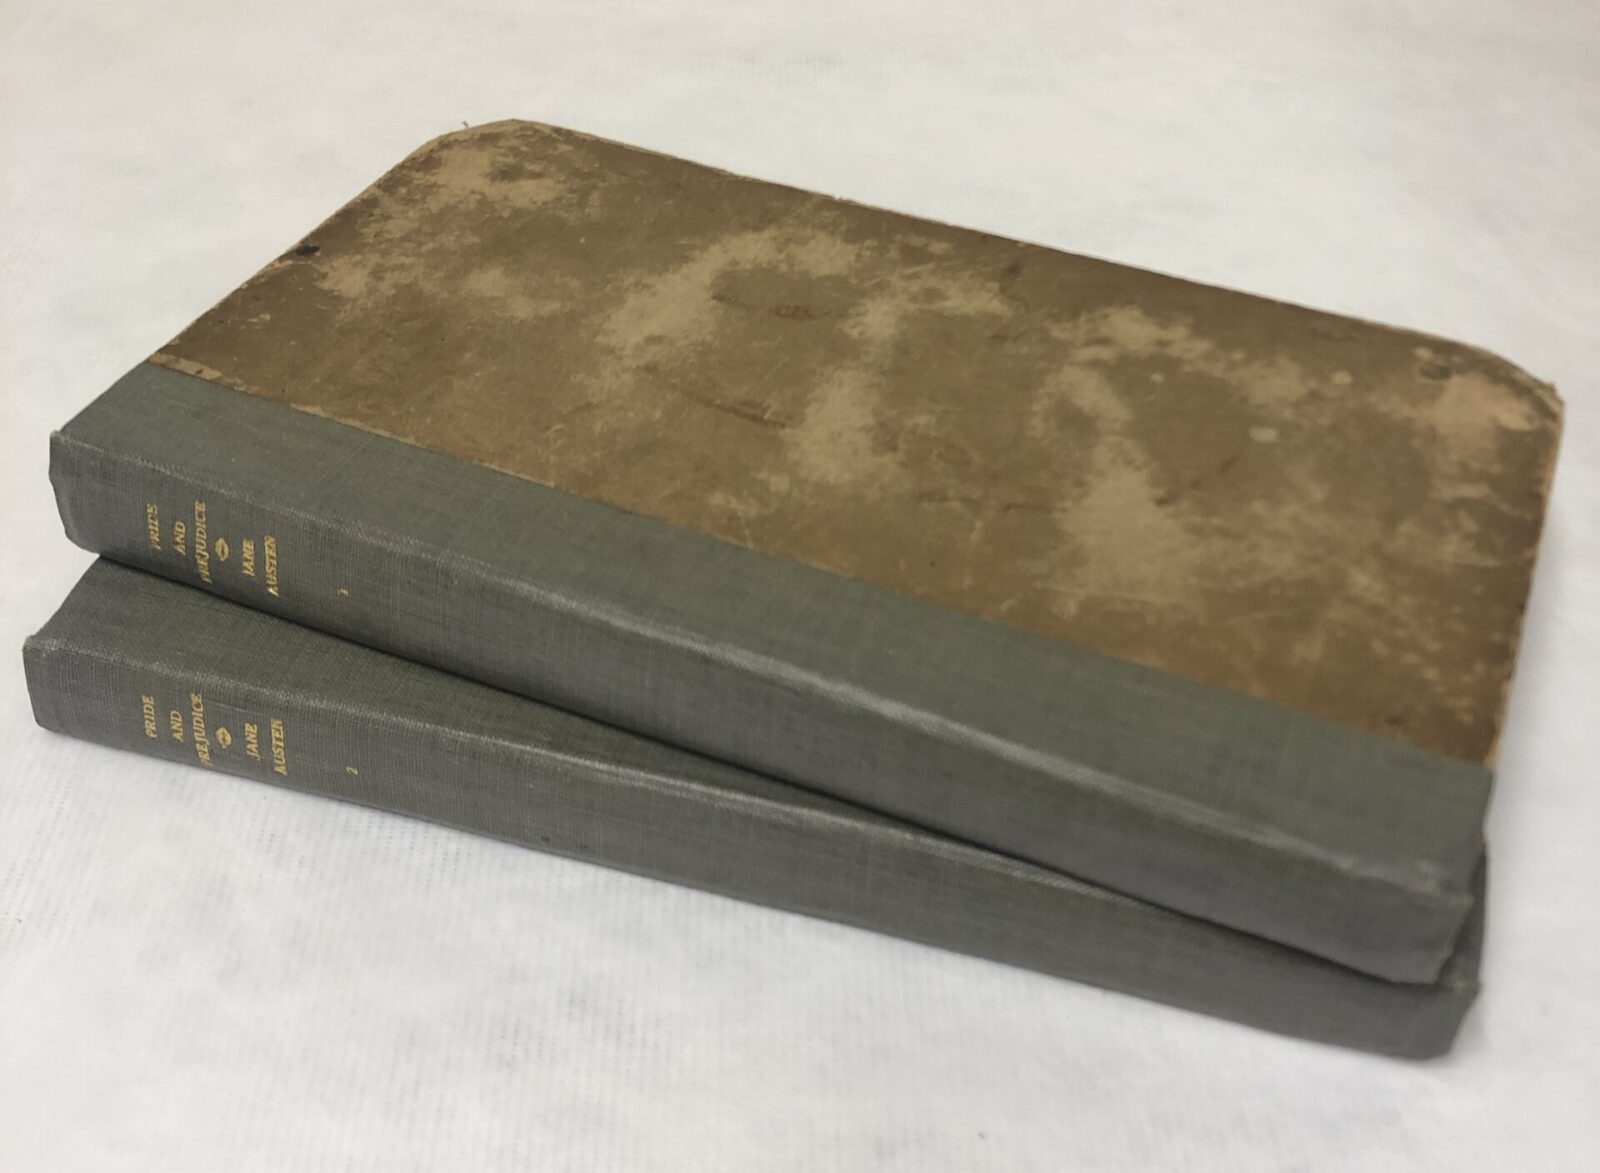 First American edition, in two volumes with drab board covers